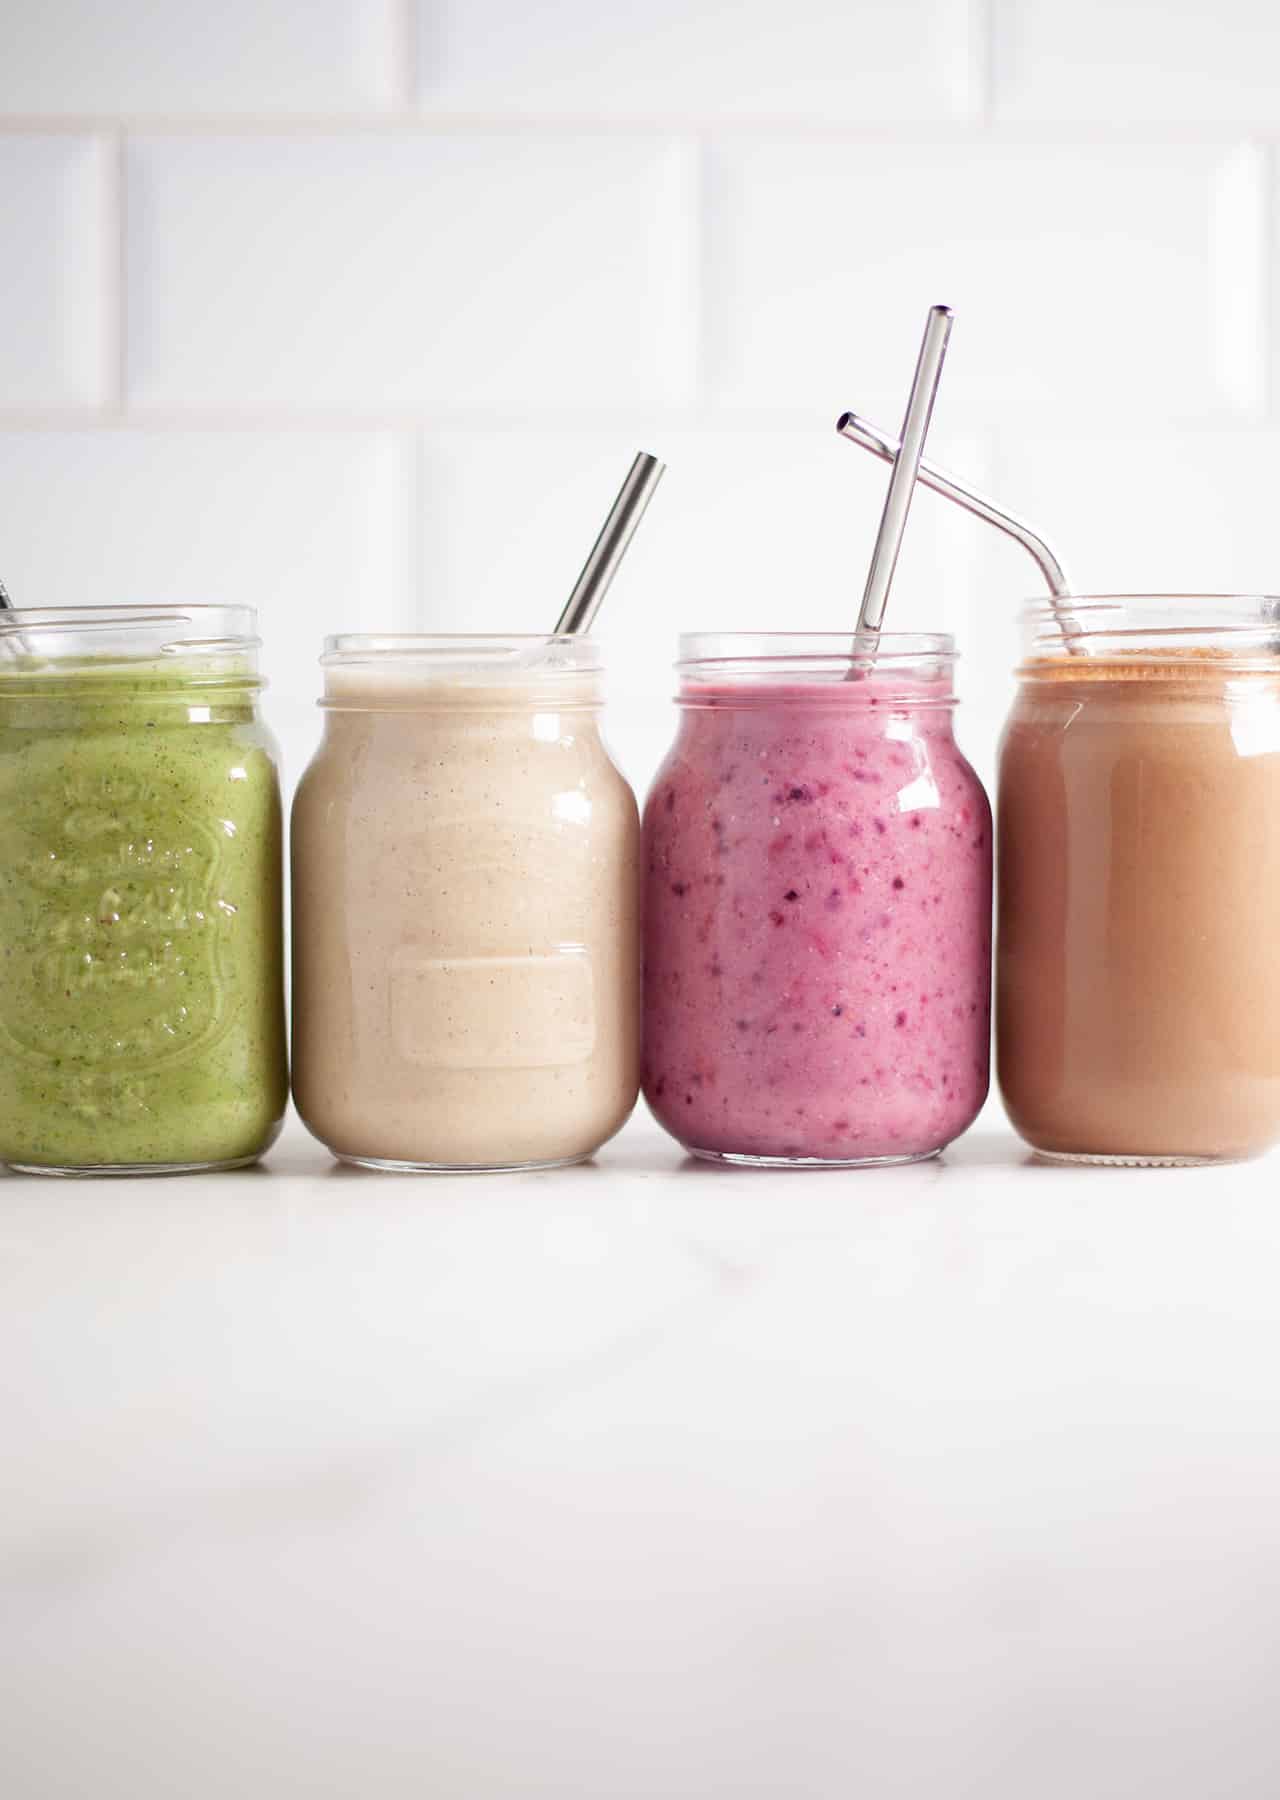 17 Tasty Vegan Protein Smoothie Recipes for Weight Loss